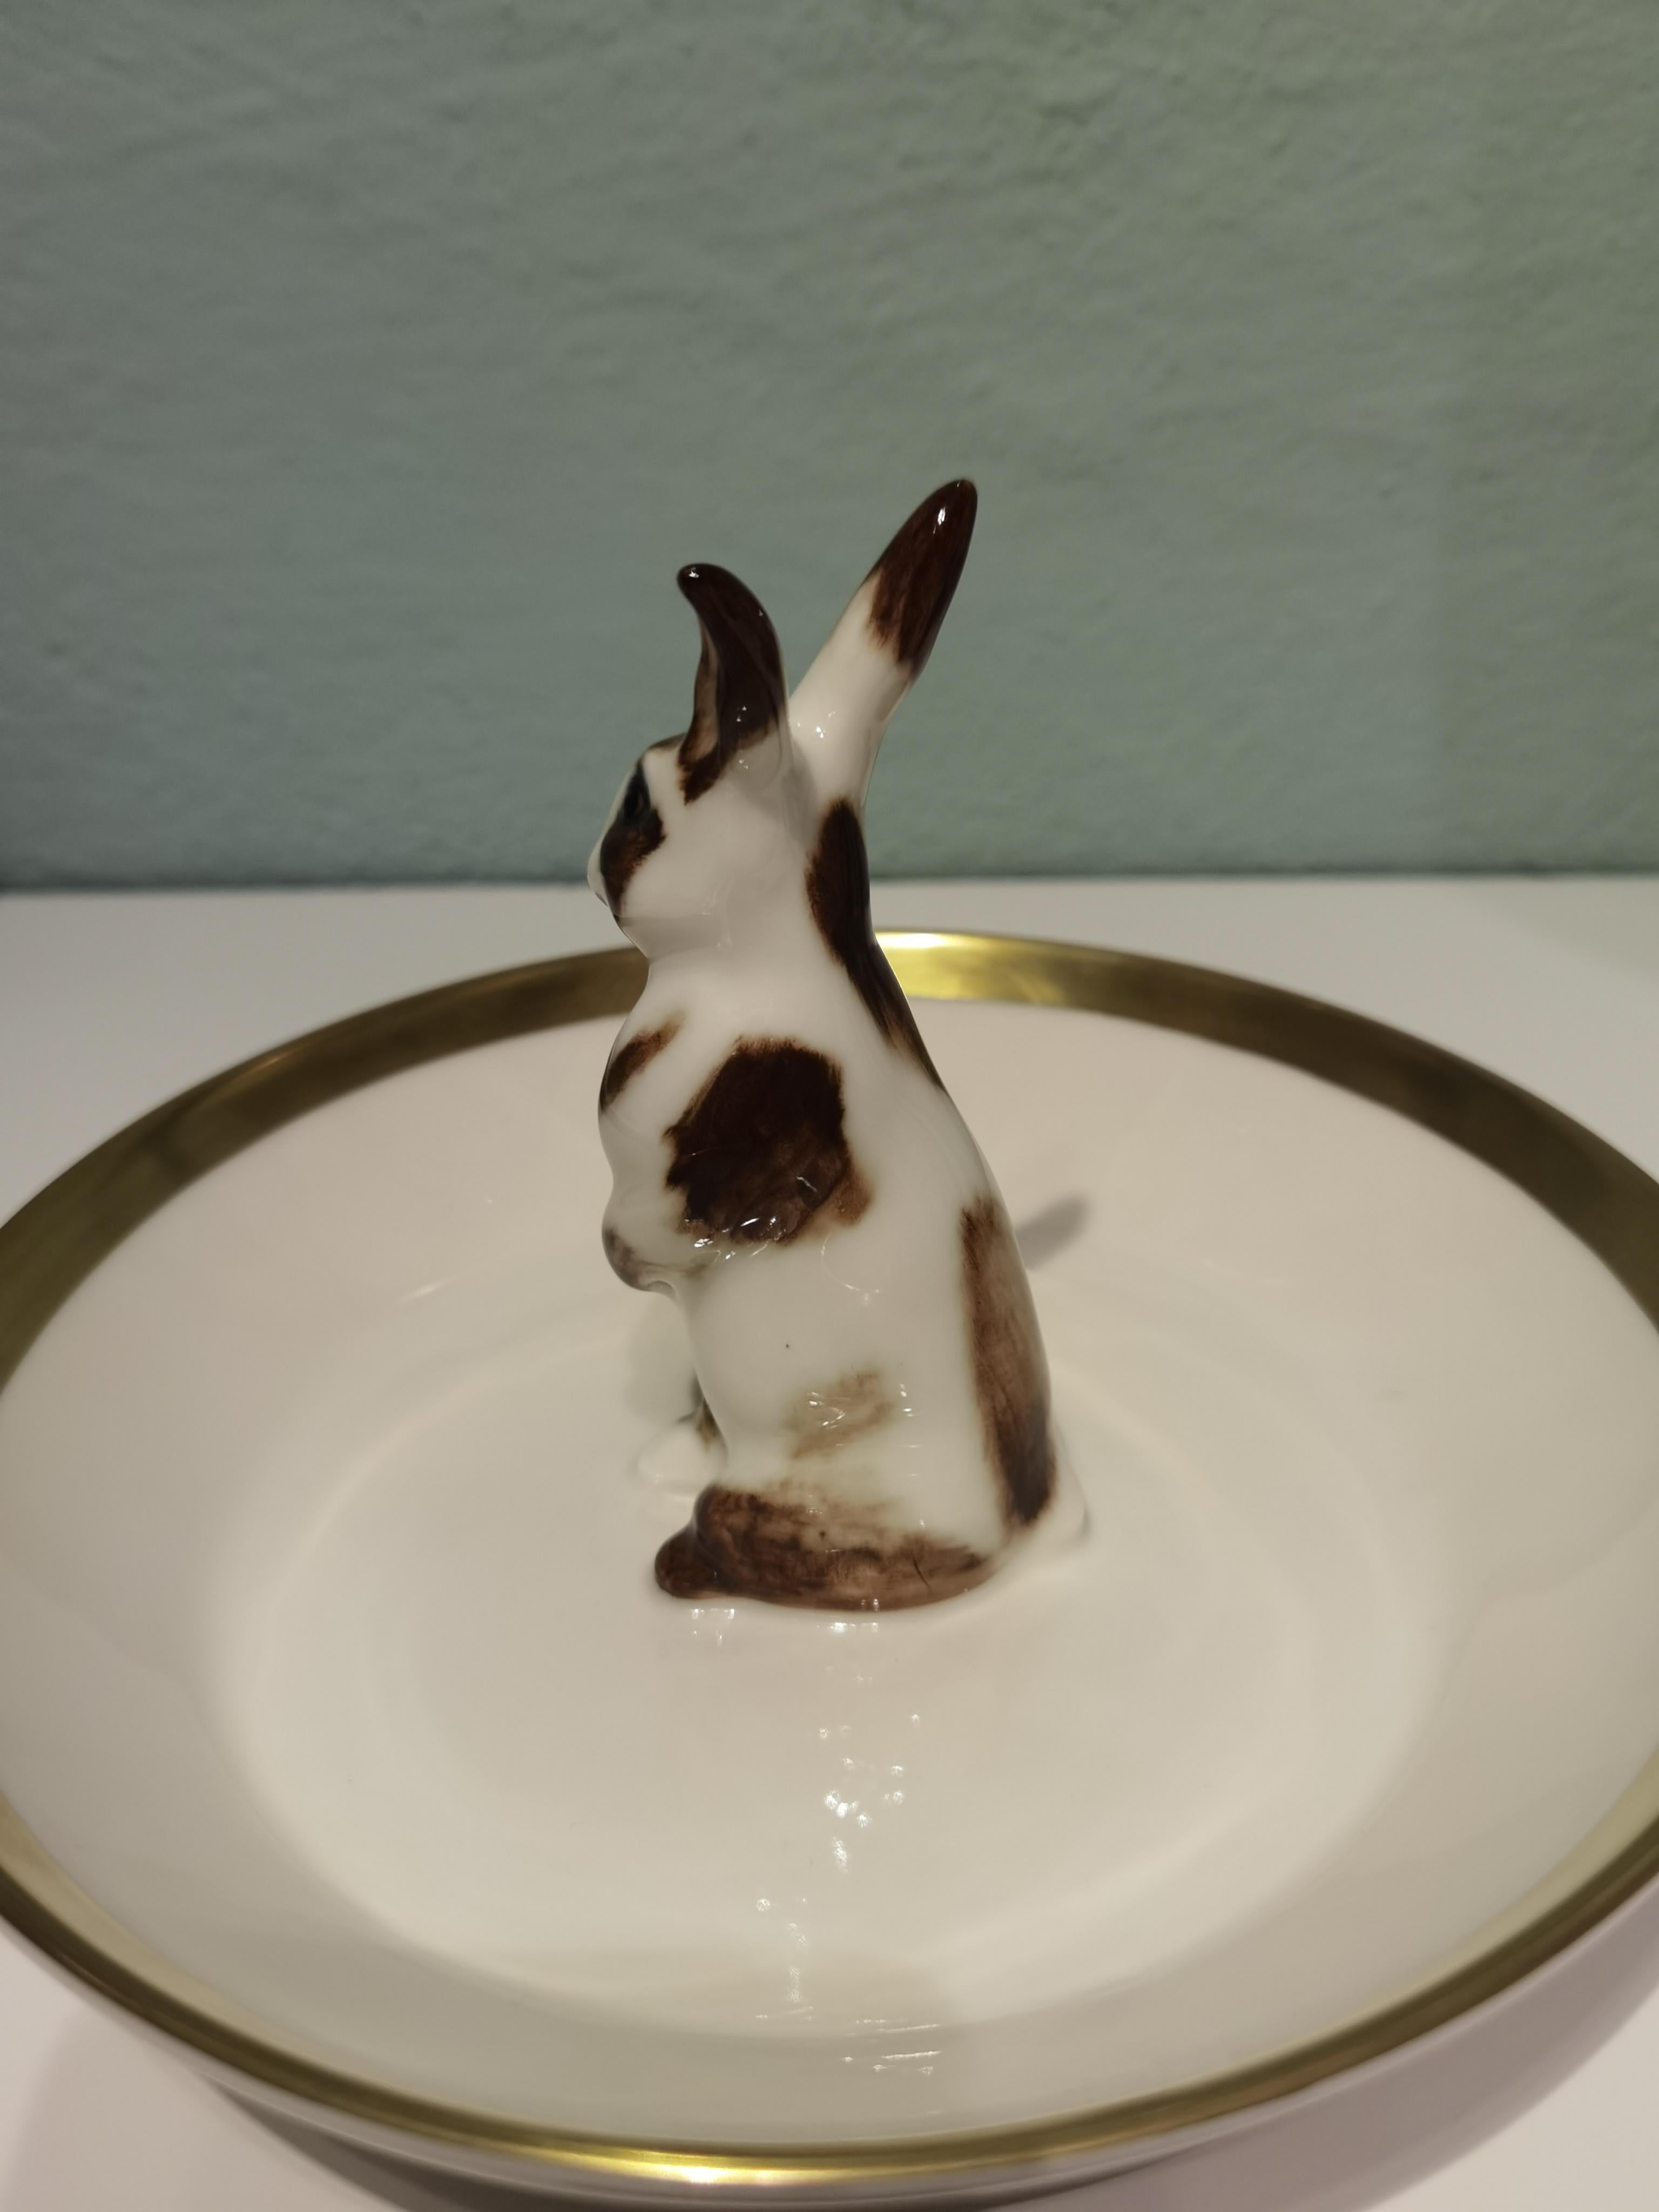 Completely handmade porcelain bowl with a hands-free naturalistic painted Easter rabbit in brown and white colors. The rabbit is sitting in the middle of the bowl for decorating nuts or sweets around the figure. Rimmed with a fine 24-carat gold